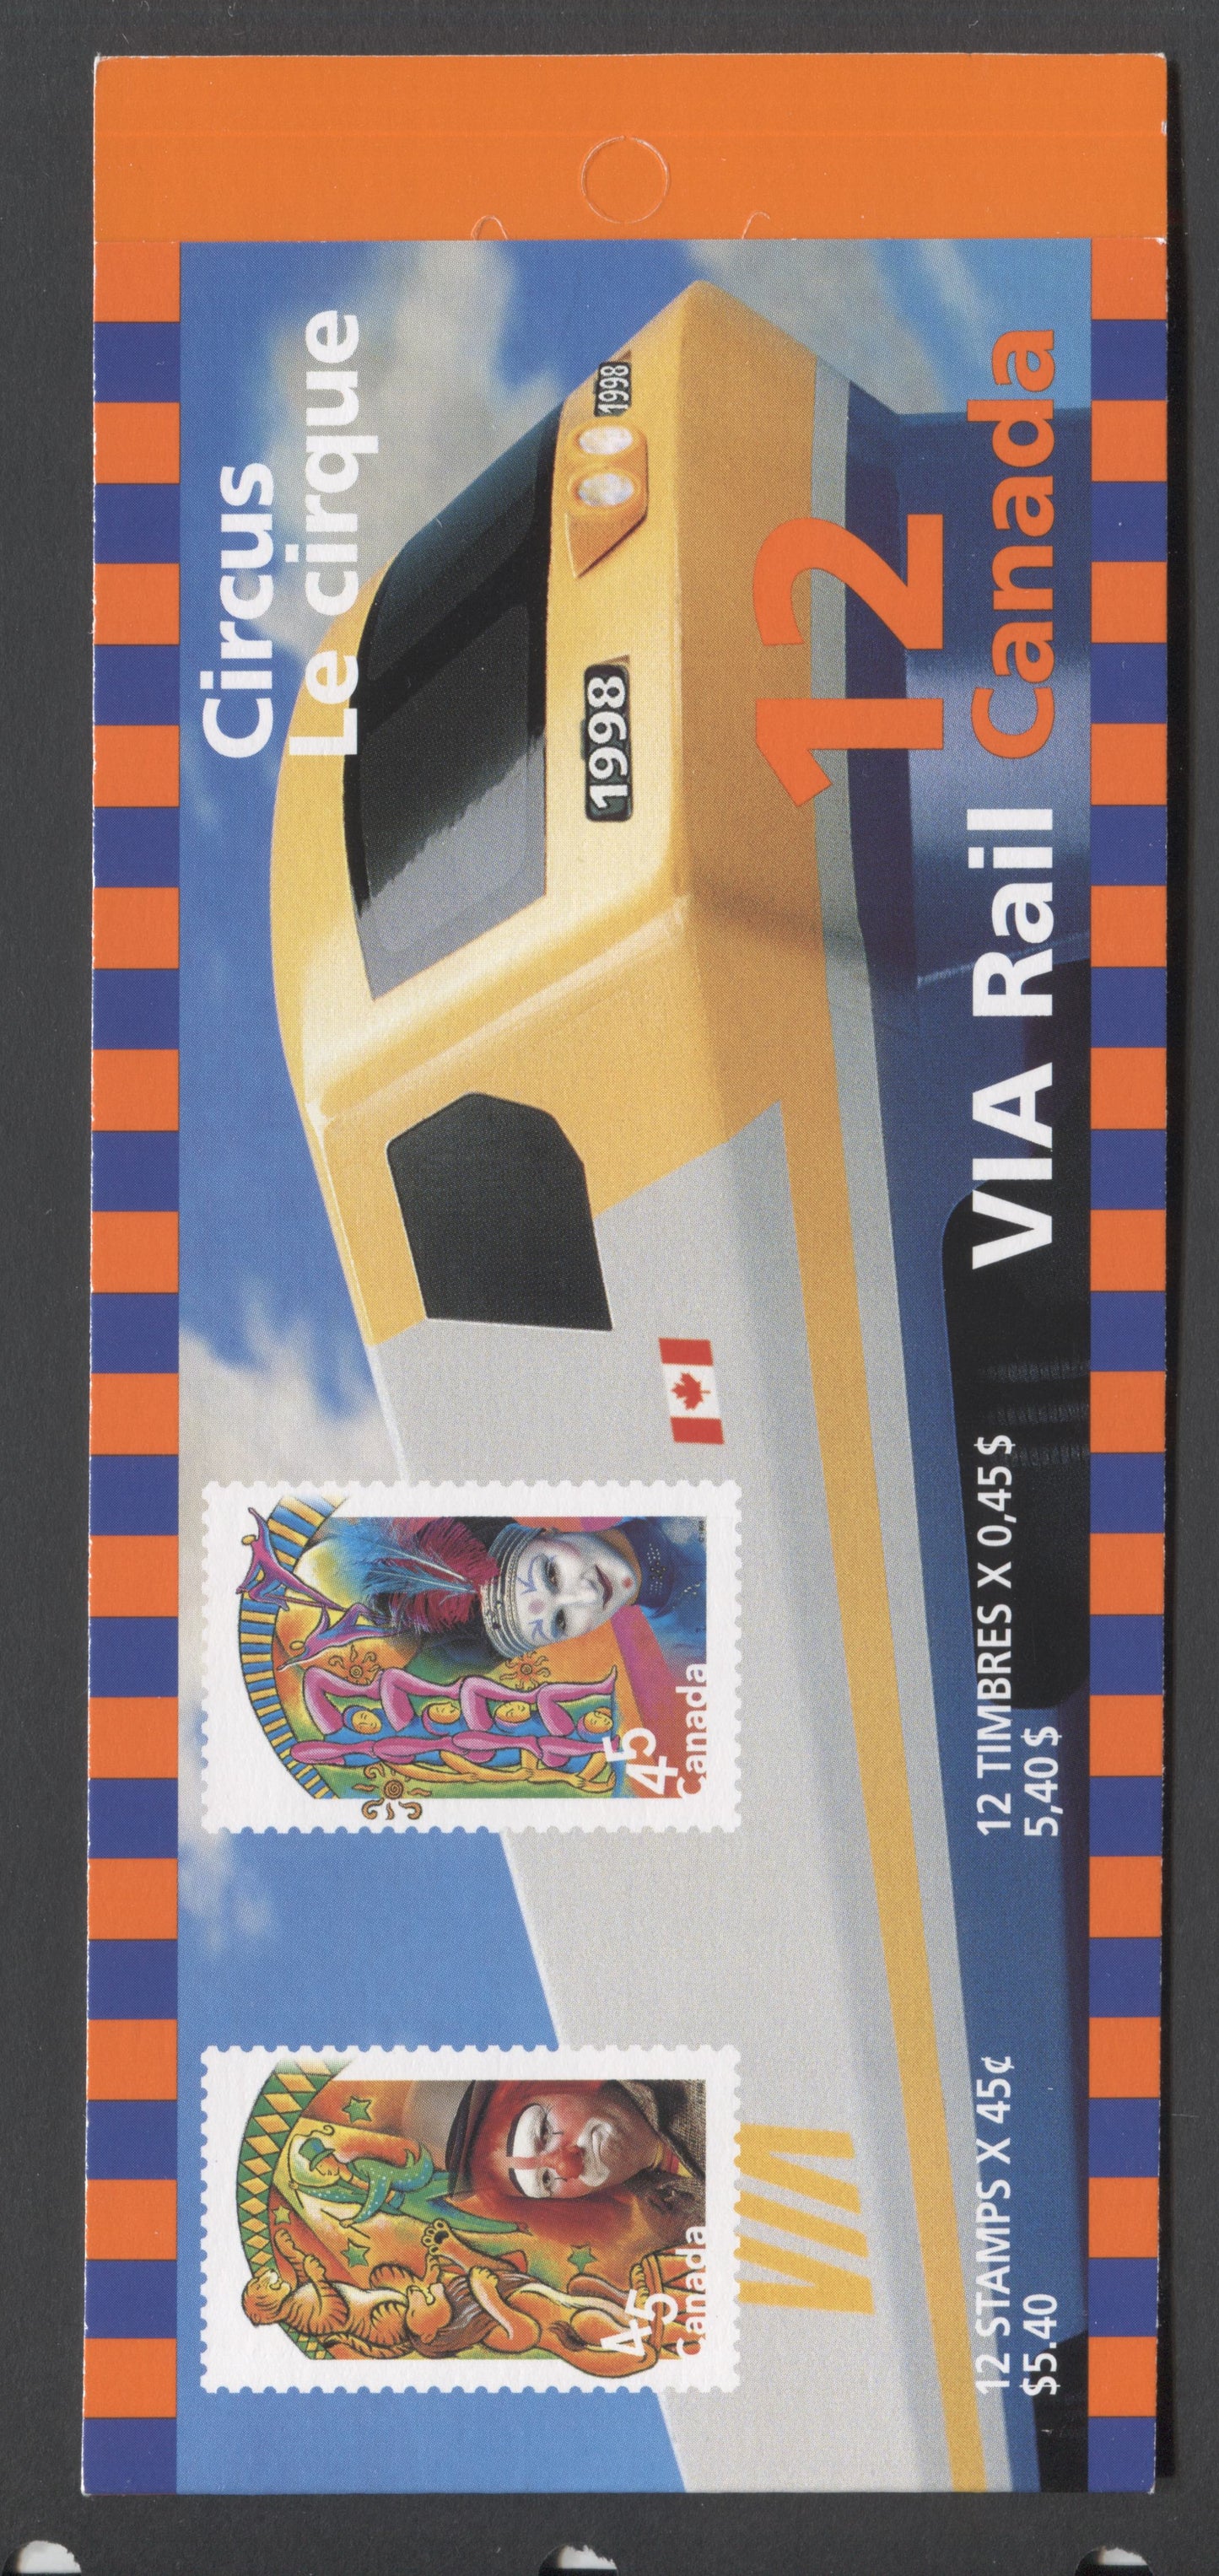 Canada #BK210a-b 1998 The Circus Issue, Complete $5.40 Booklet, Tullis Russell Coatings Paper, Dead Paper, 4 mm GT-4 Tagging